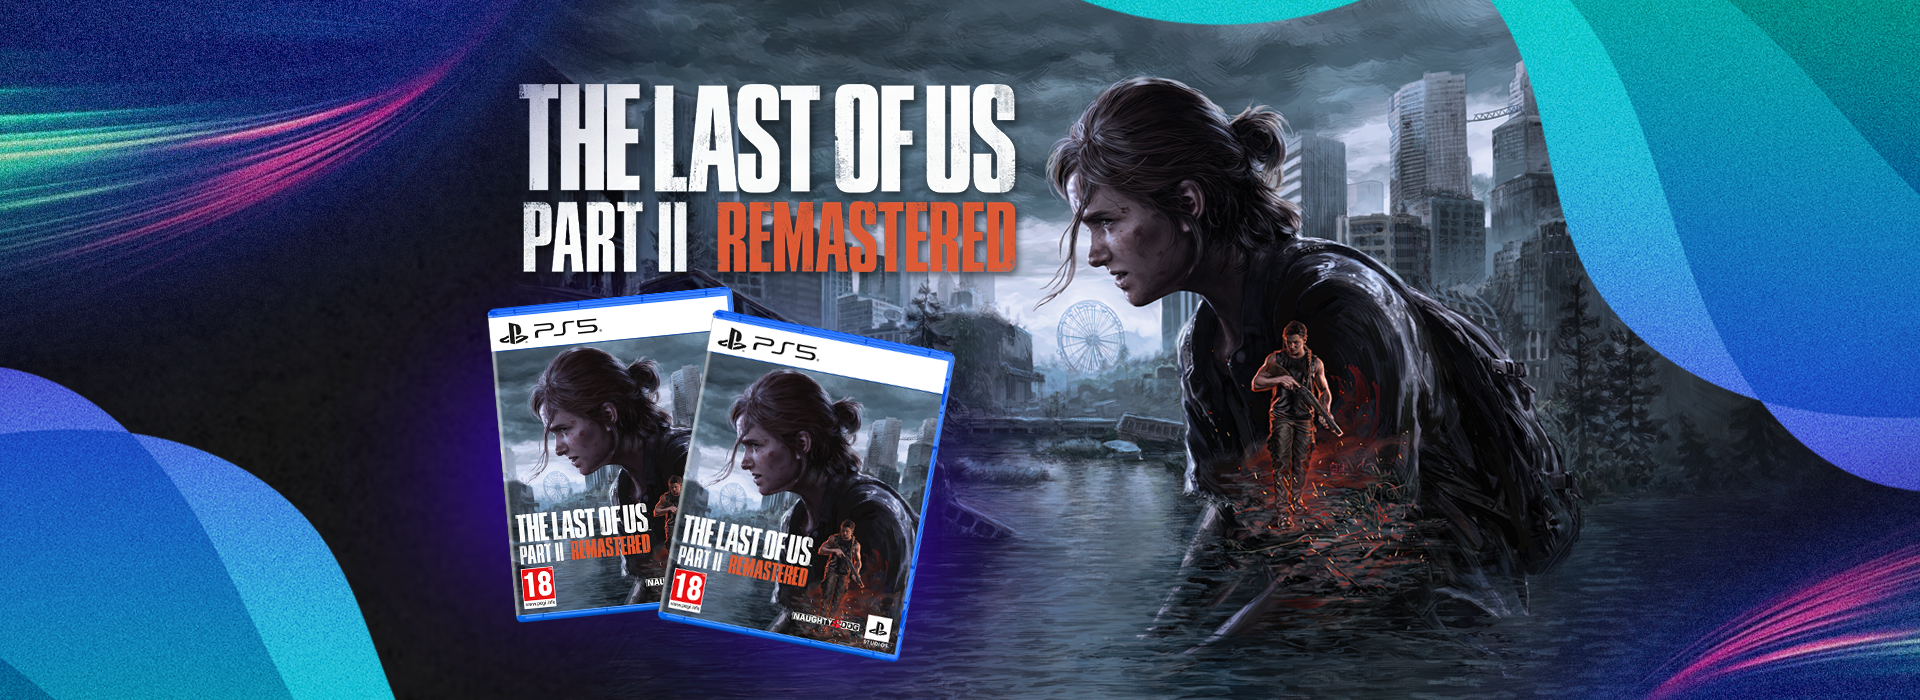 banner-site-the-last-of-us-2-remastered--2024